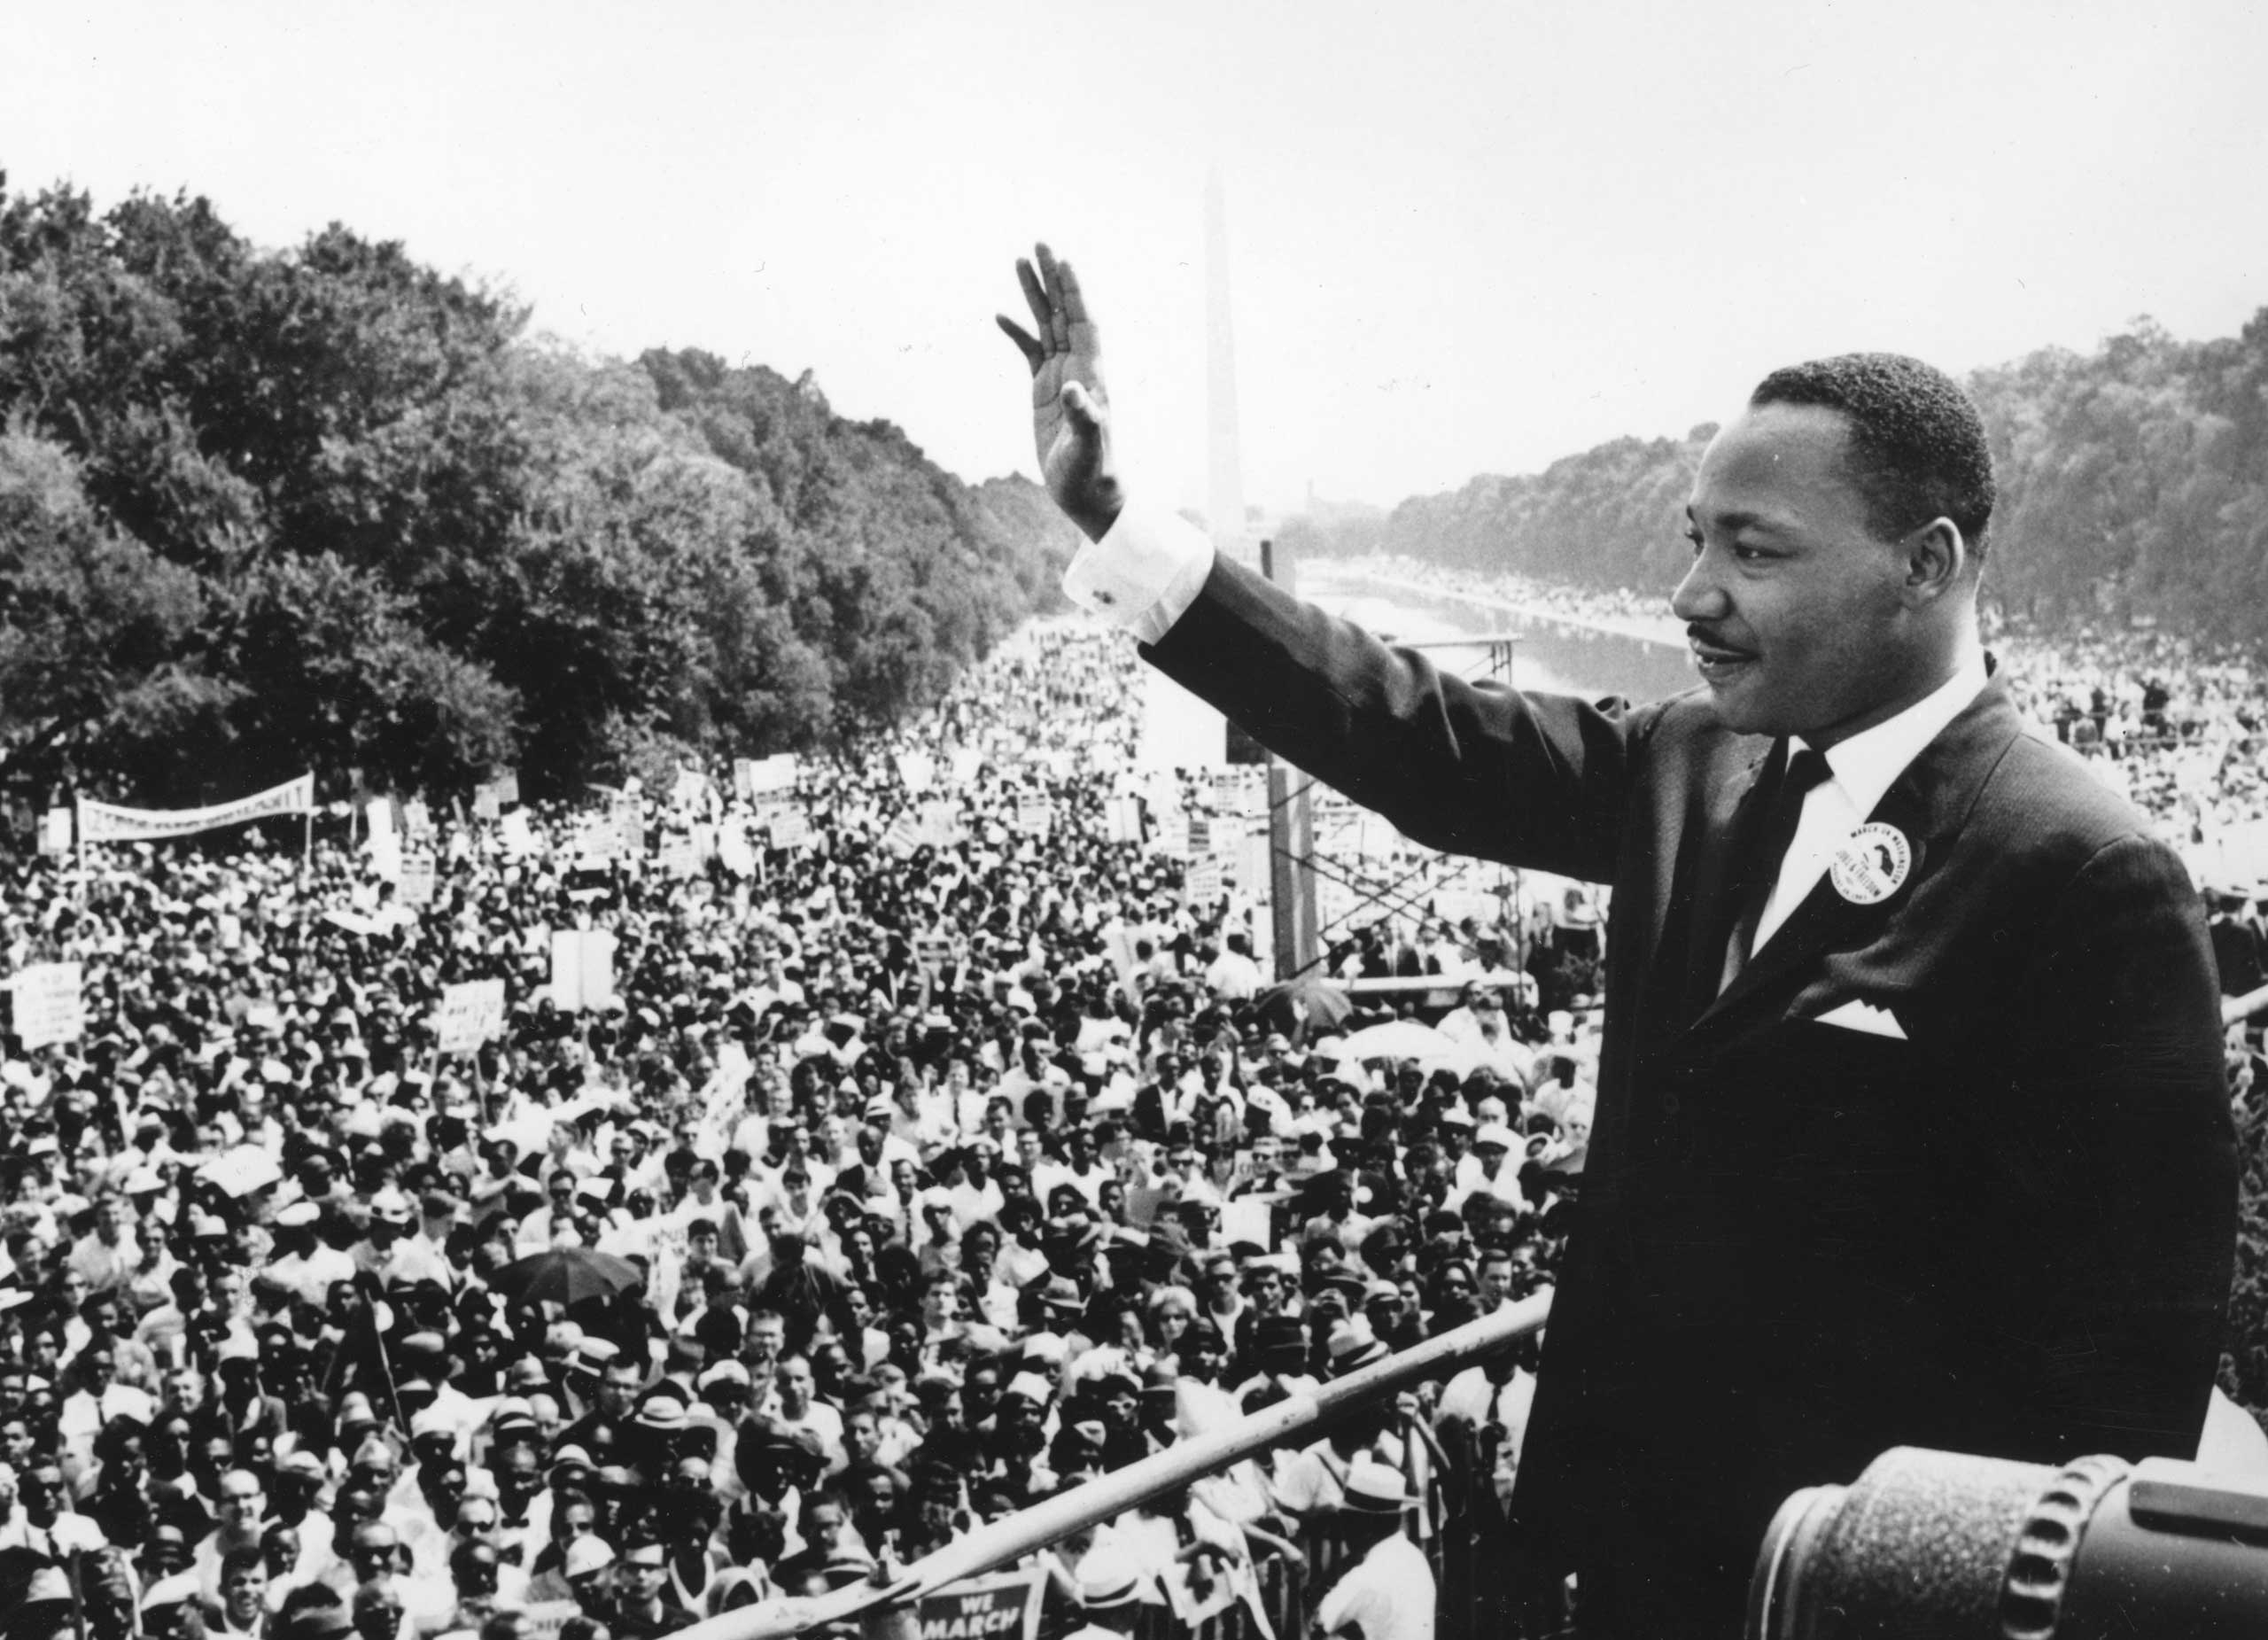 Martin Luther King Jr. addresses crowds during the March On Washington at the Lincoln Memorial, Washington DC, in 1963. (Agence France Presse/Getty Images)